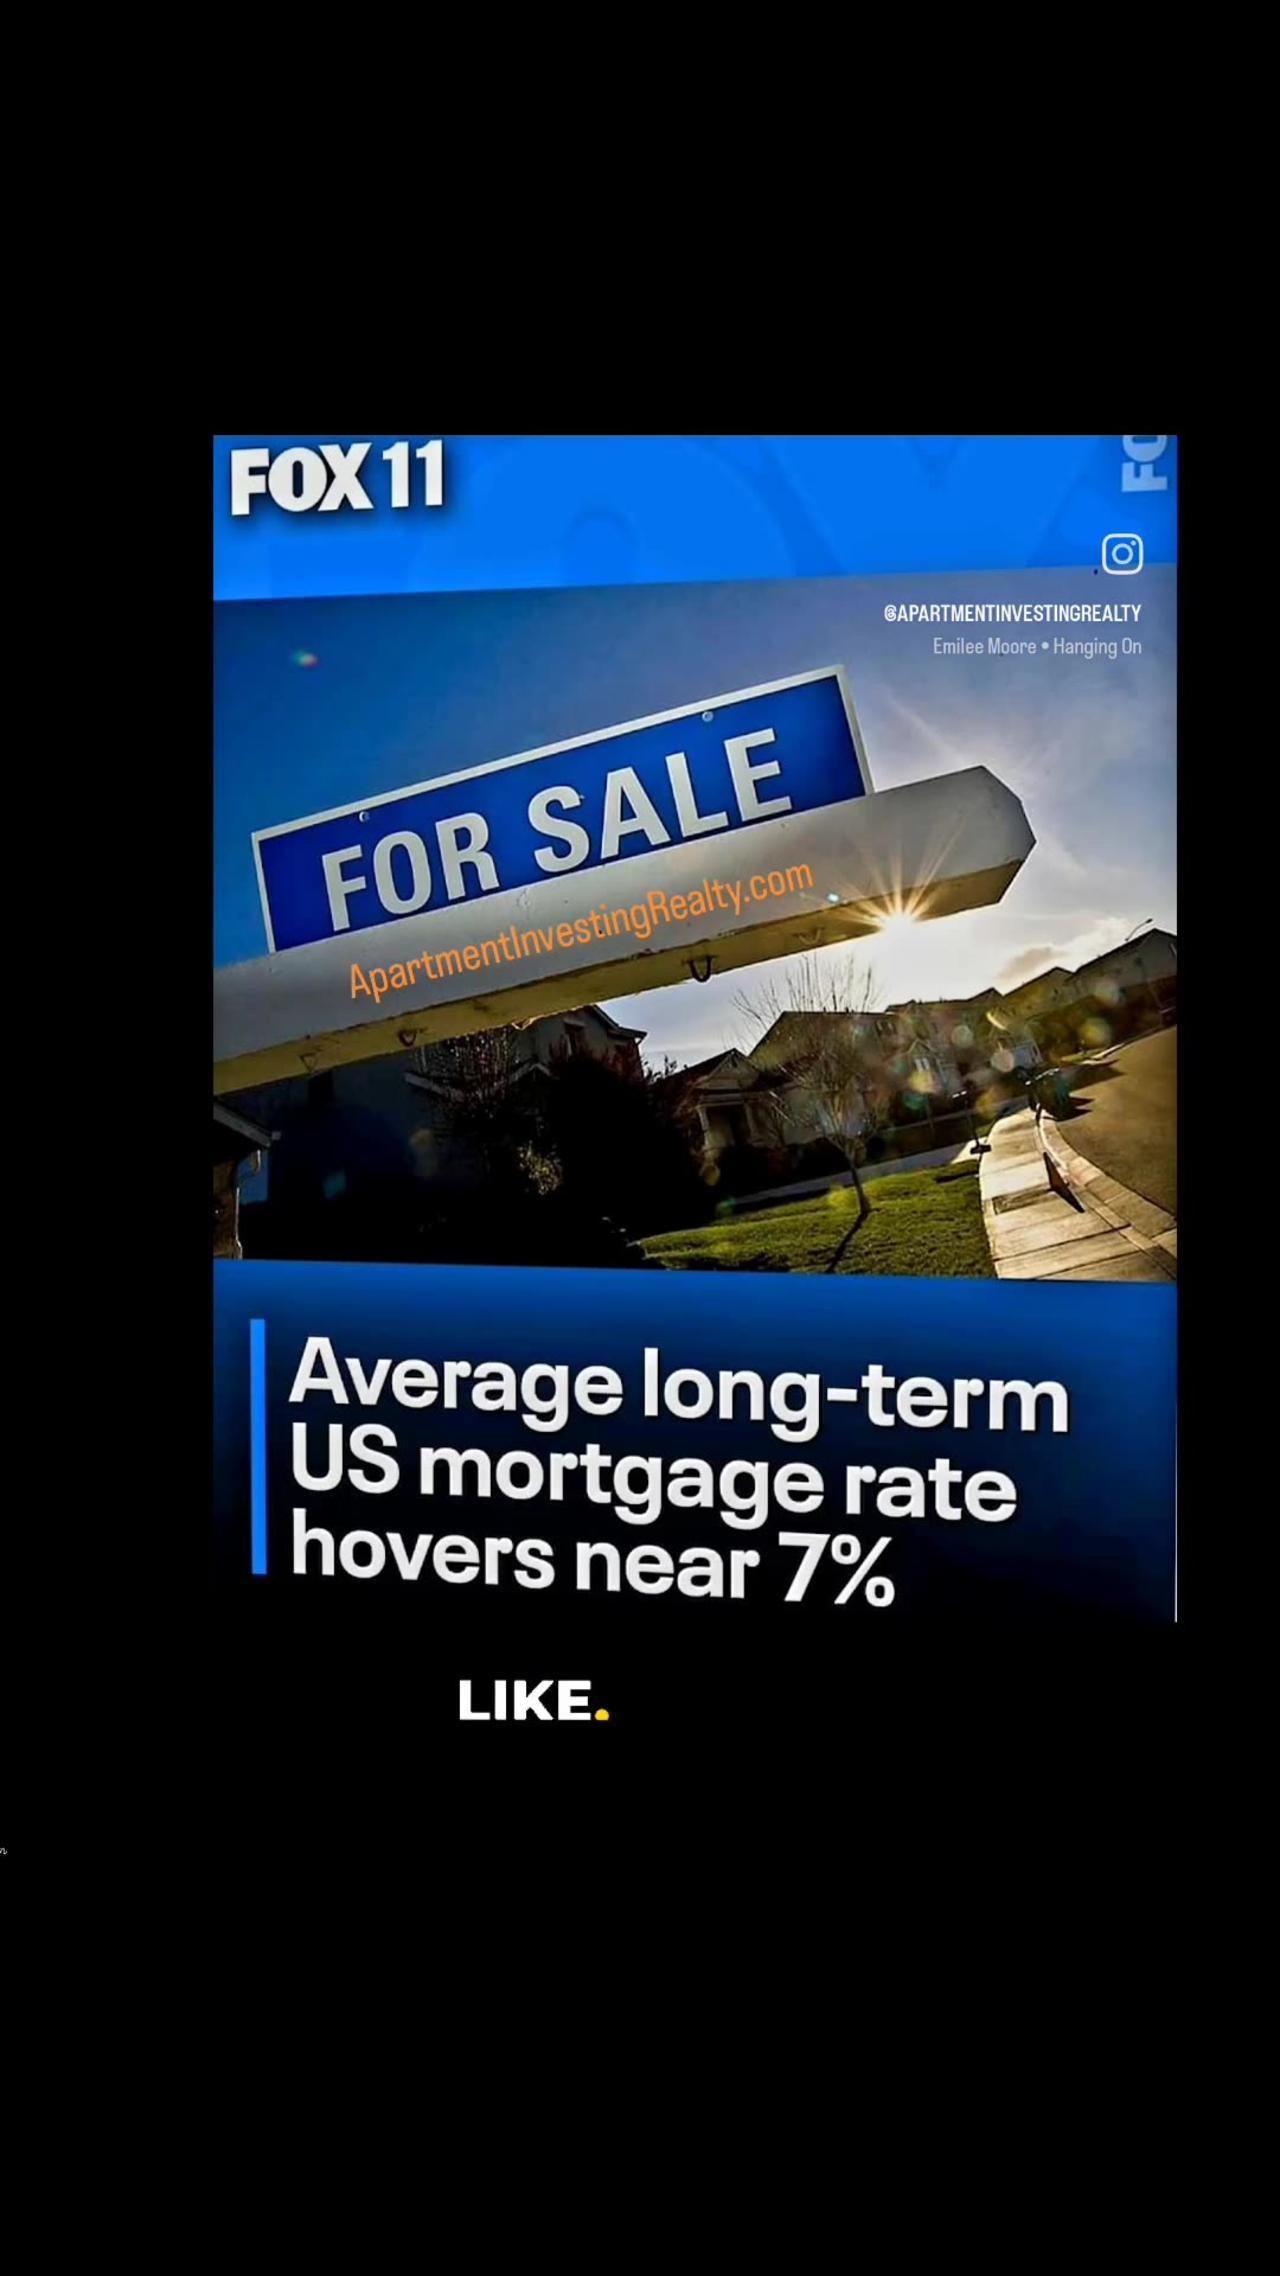 U.S. Mortgage Rate Nearly 7% 🫠🙃 We Can Help!